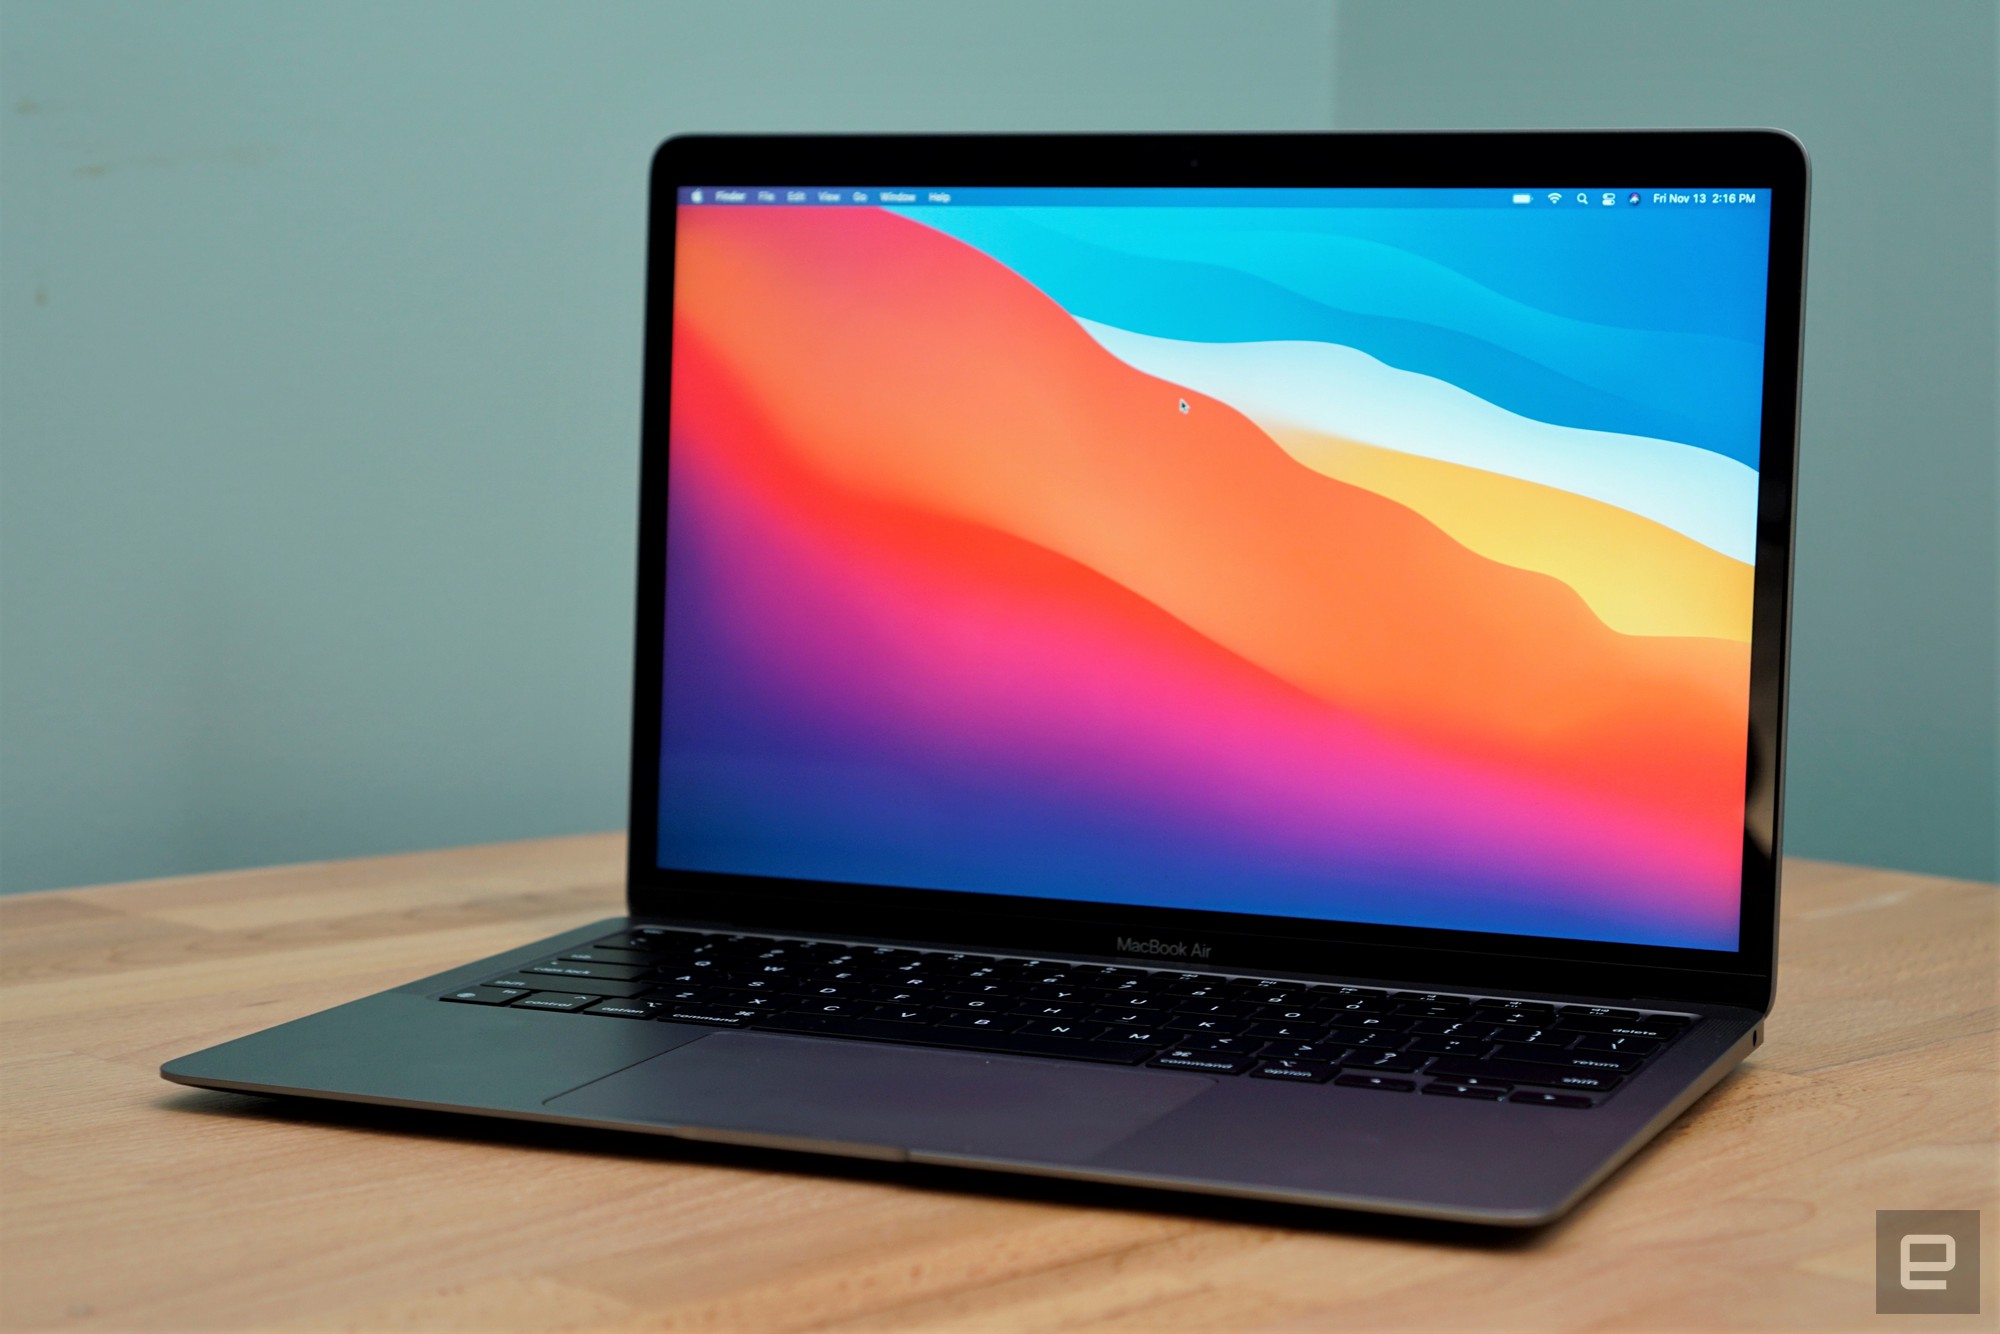 The MacBook Air M1 drops back down to $900 at Amazon